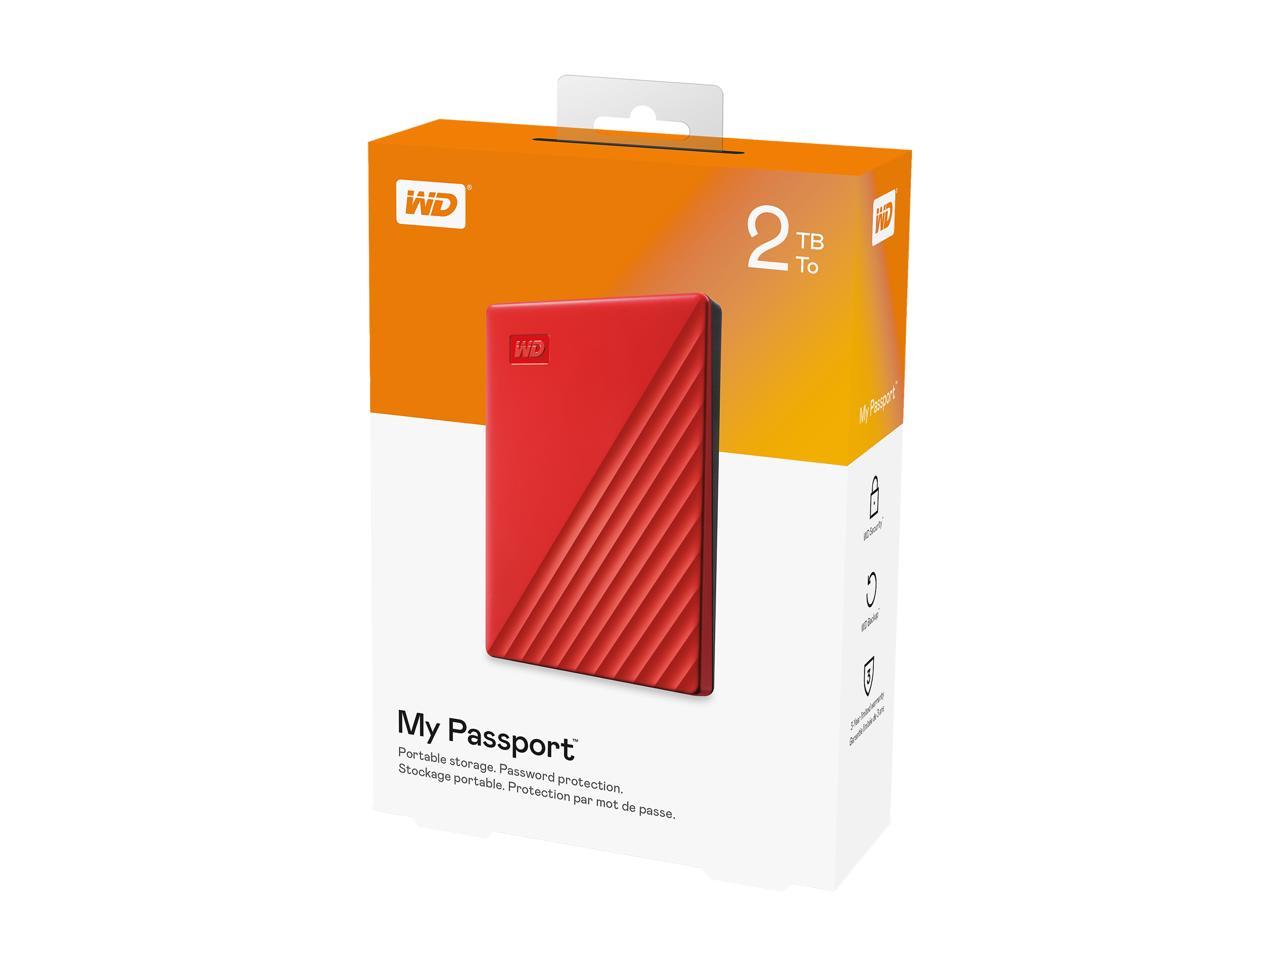 Wd 2Tb My Passport Portable Storage External Hard Drive Usb 3.2 For Pc/Mac Red (Wdbyvg0020Brd-Wesn)